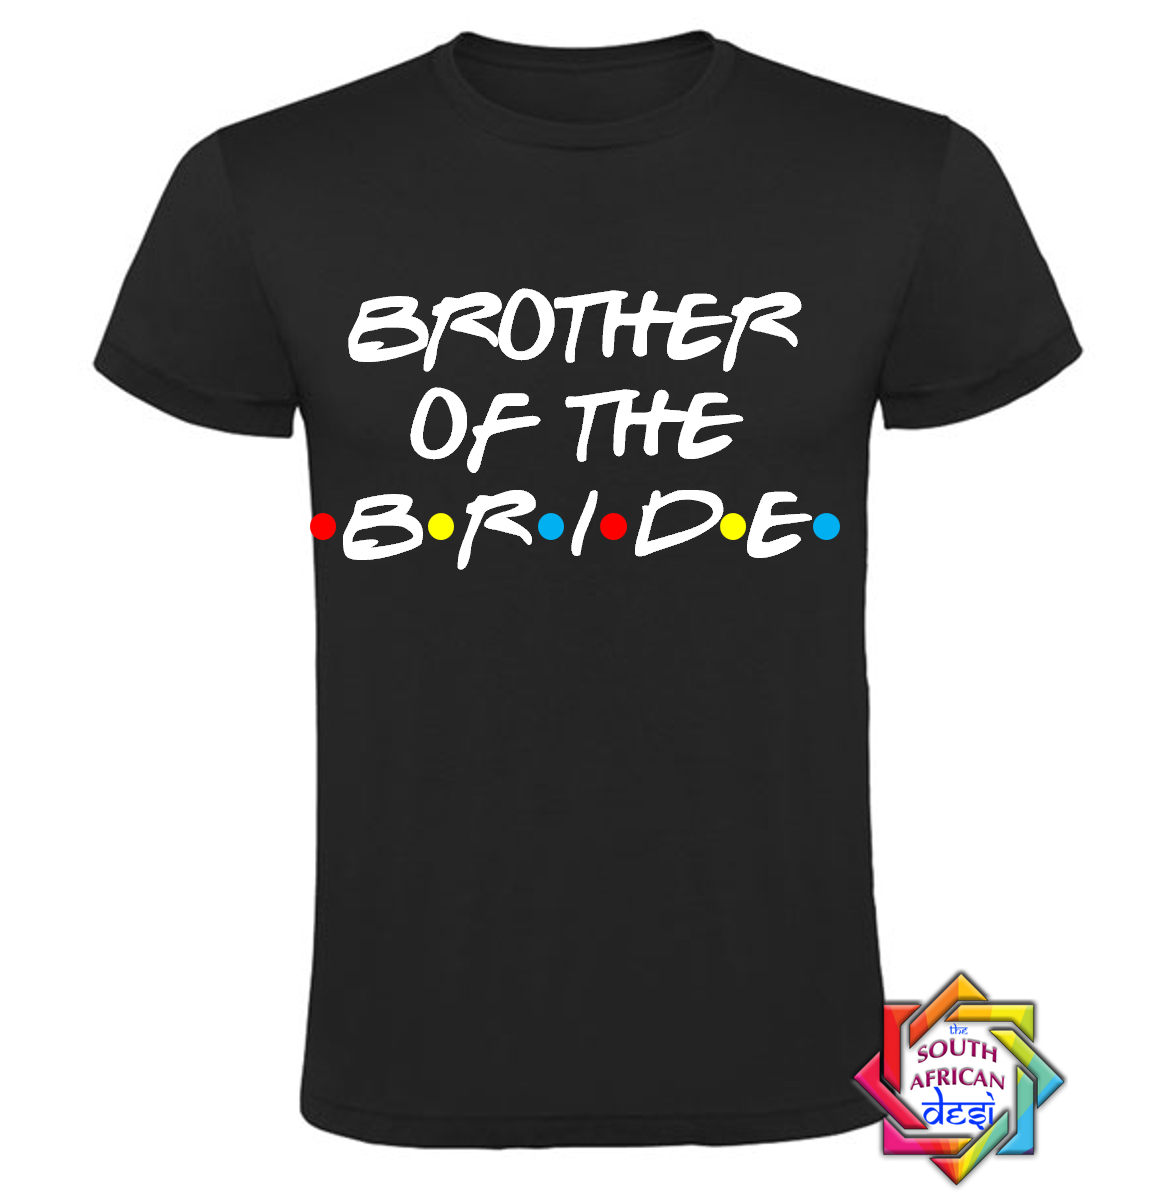 BROTHER OF THE BRIDE - FRIENDS FONT T-SHIRT